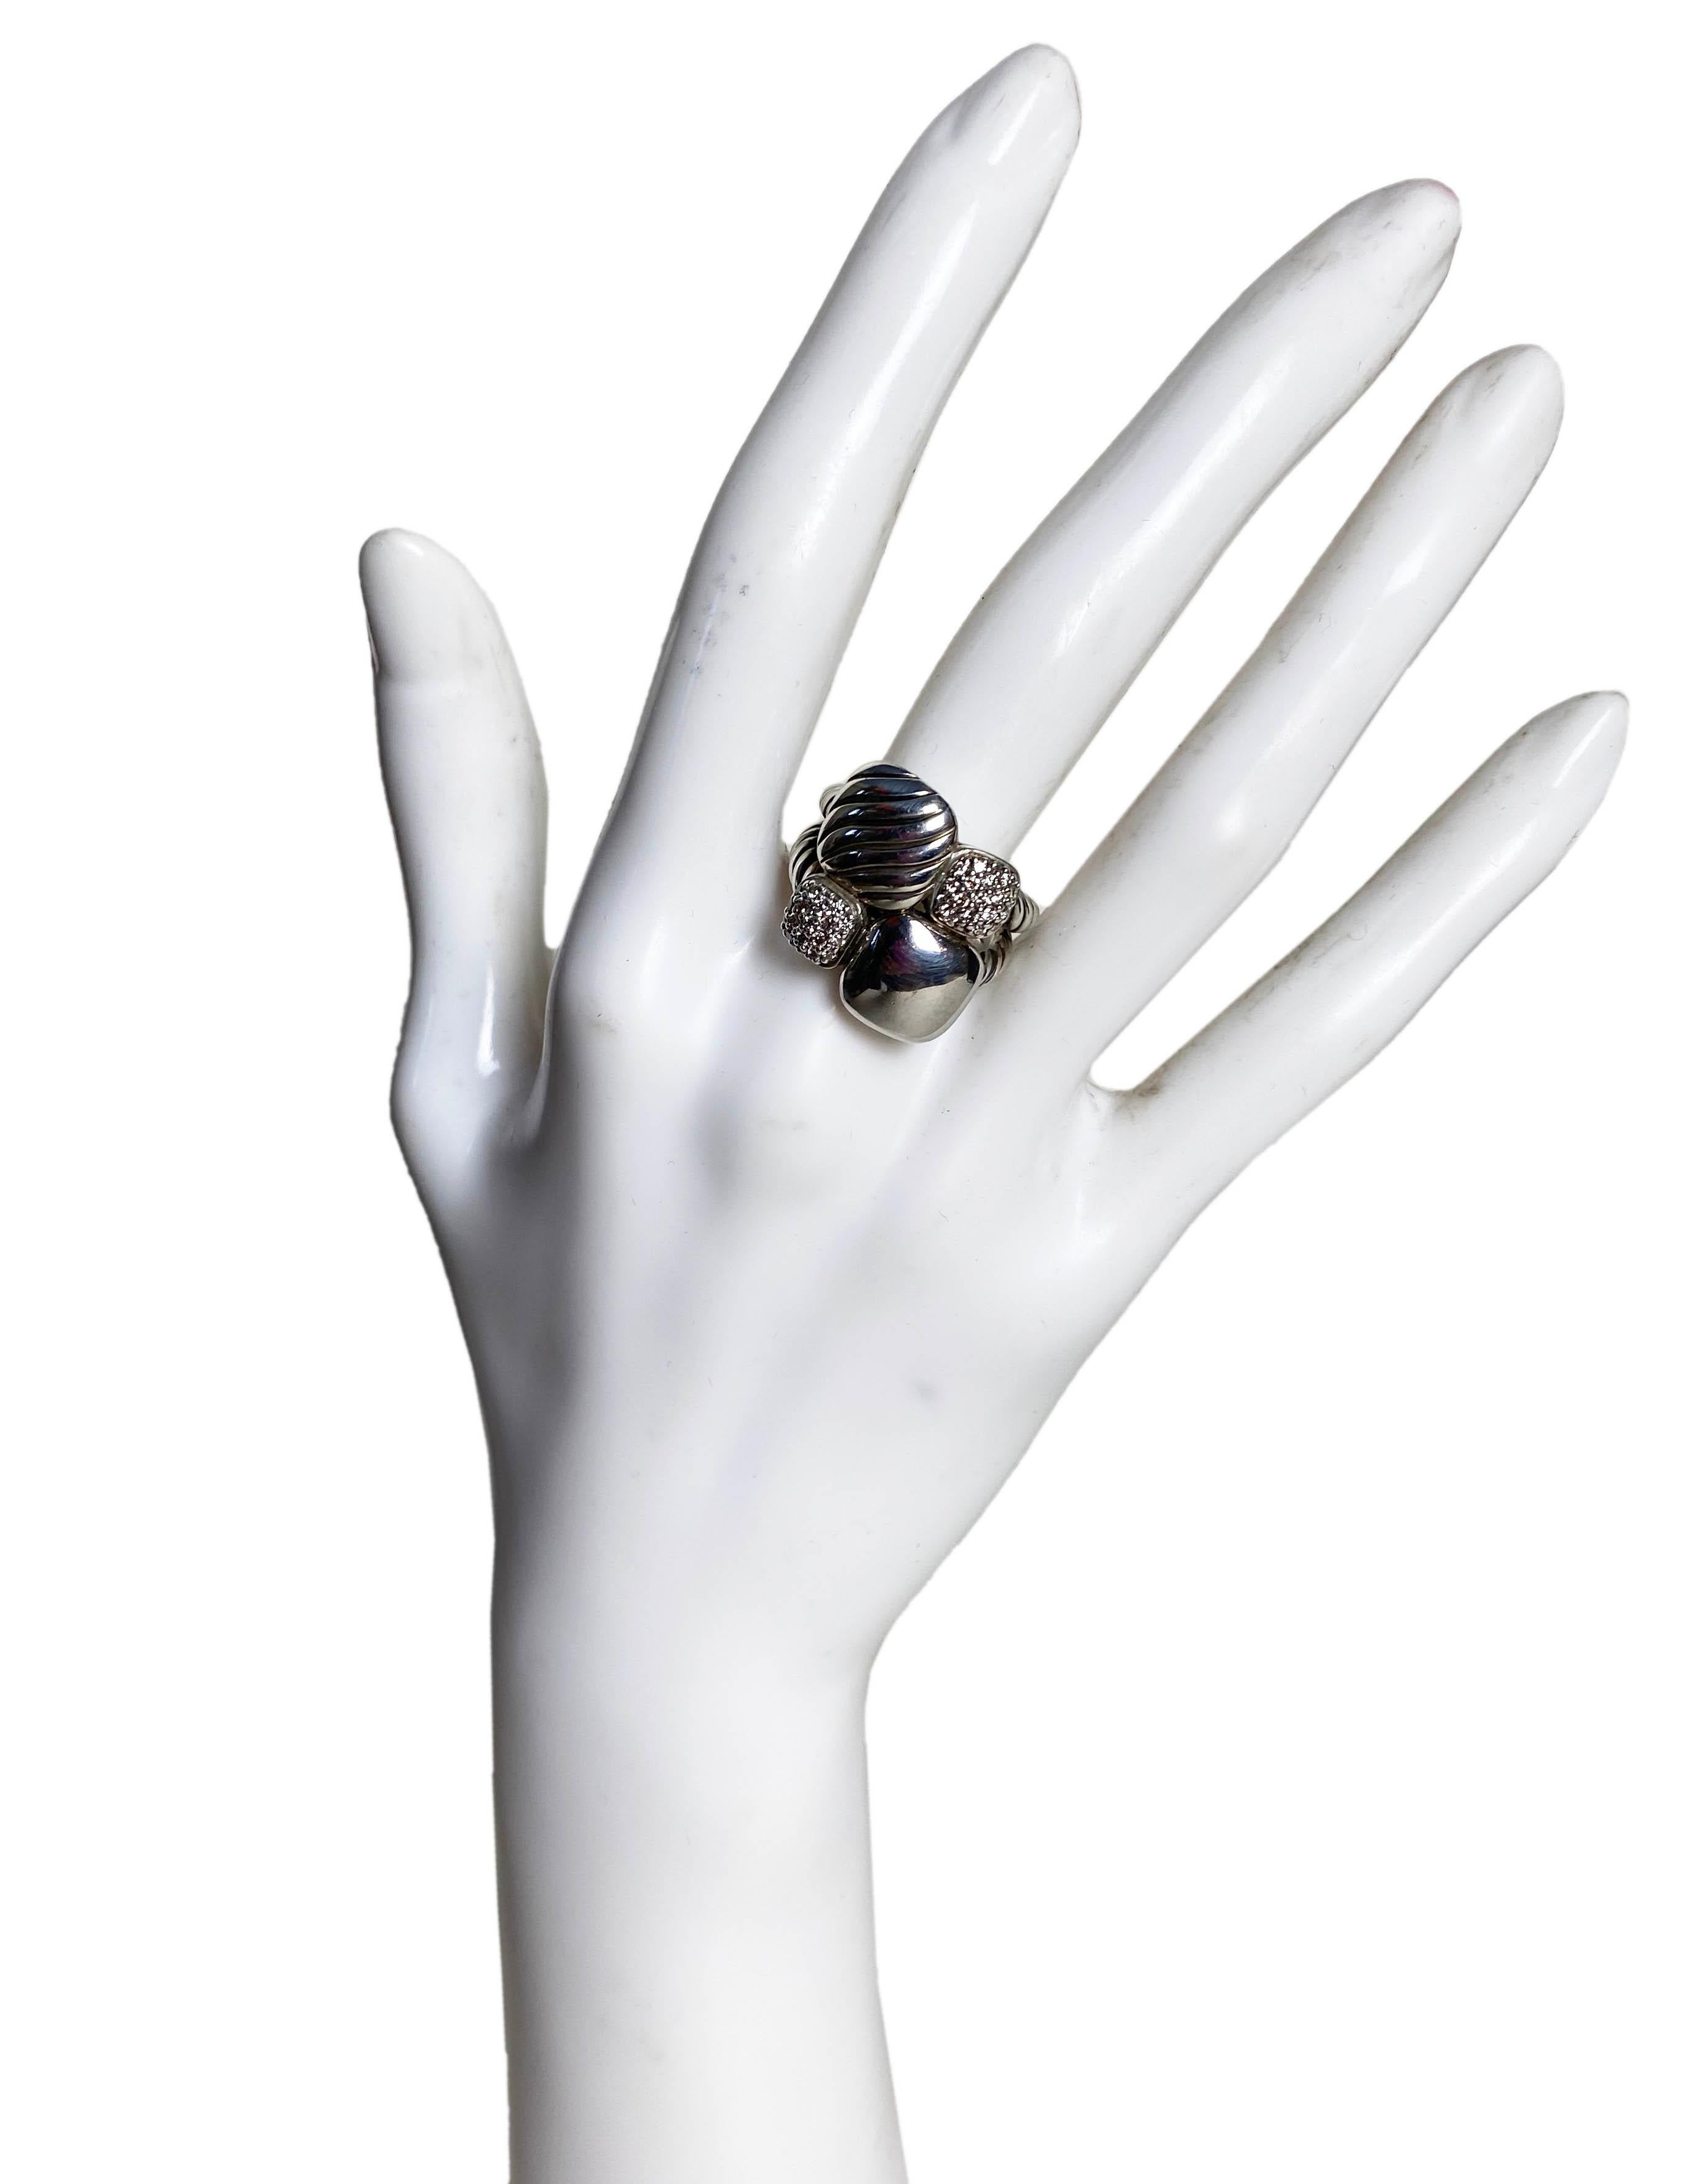 David Yurman Sterling Silver & Diamond Small Cushion Chiclet Ring sz 7

Materials: Sterling silver and diamonds
Hallmarks: DY 925
Overall Condition: Excellent pre-owned
Estimated Retail: $675 plus tax
Includes: David Yurman dustbag

Size: 7 
Band